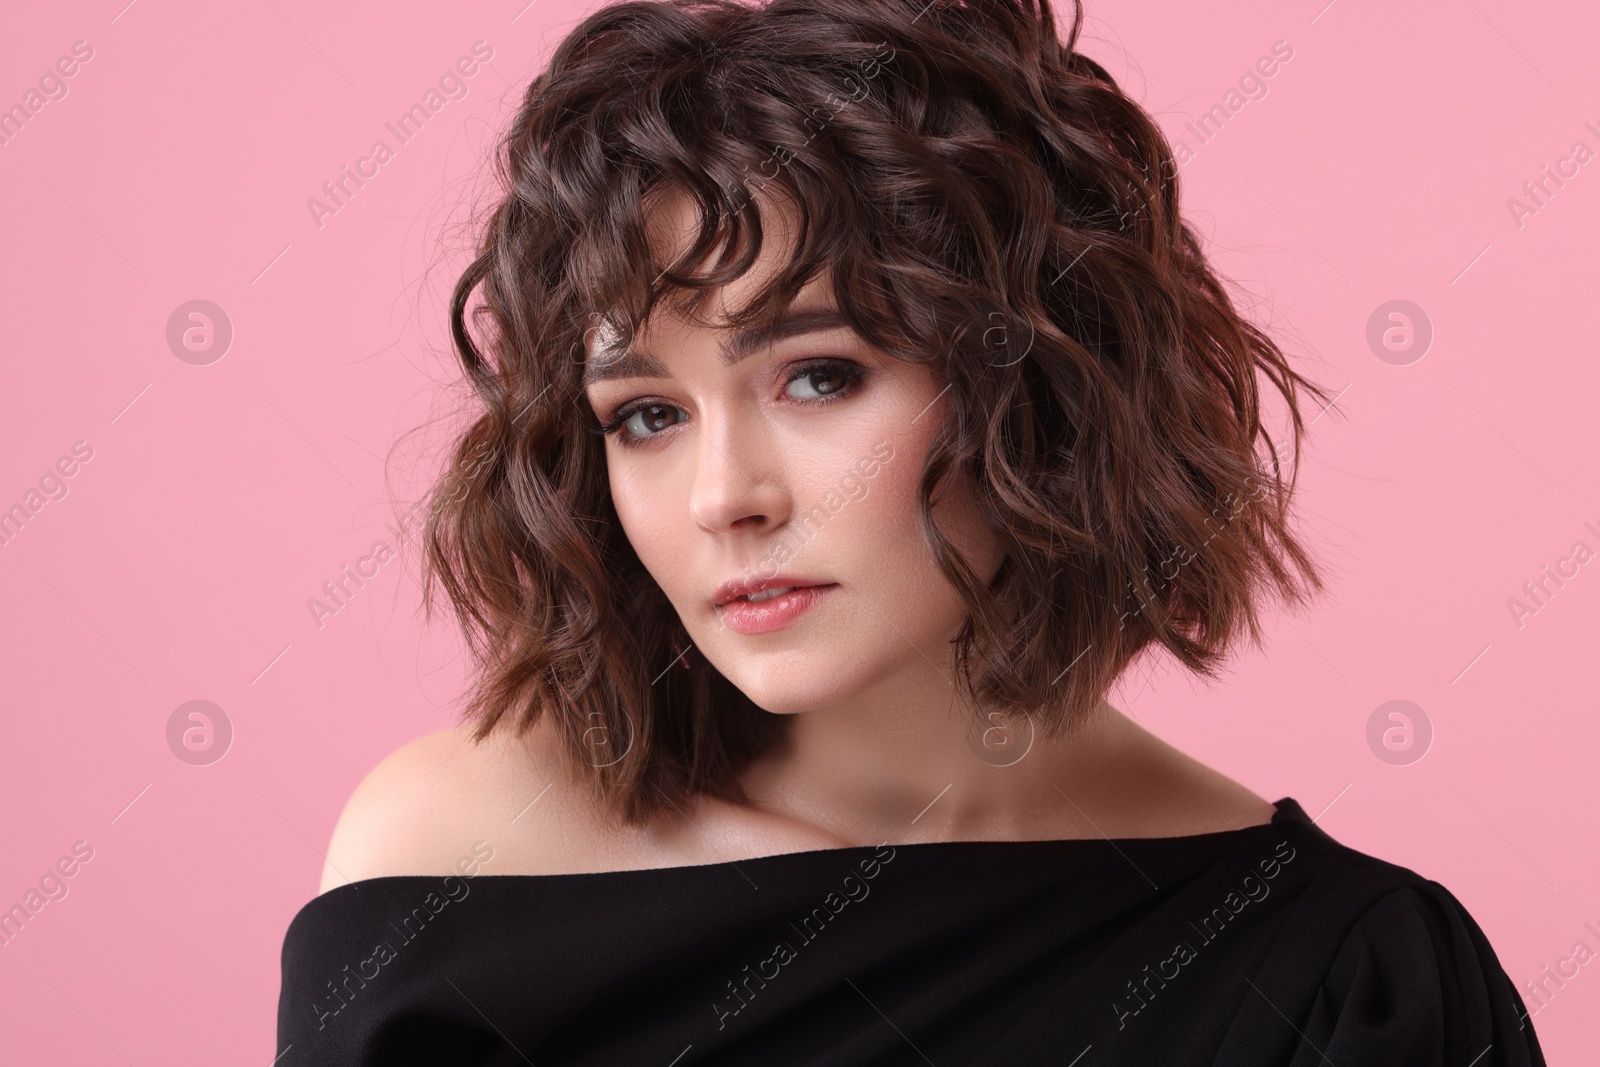 Photo of Beautiful young woman with wavy hairstyle on pink background